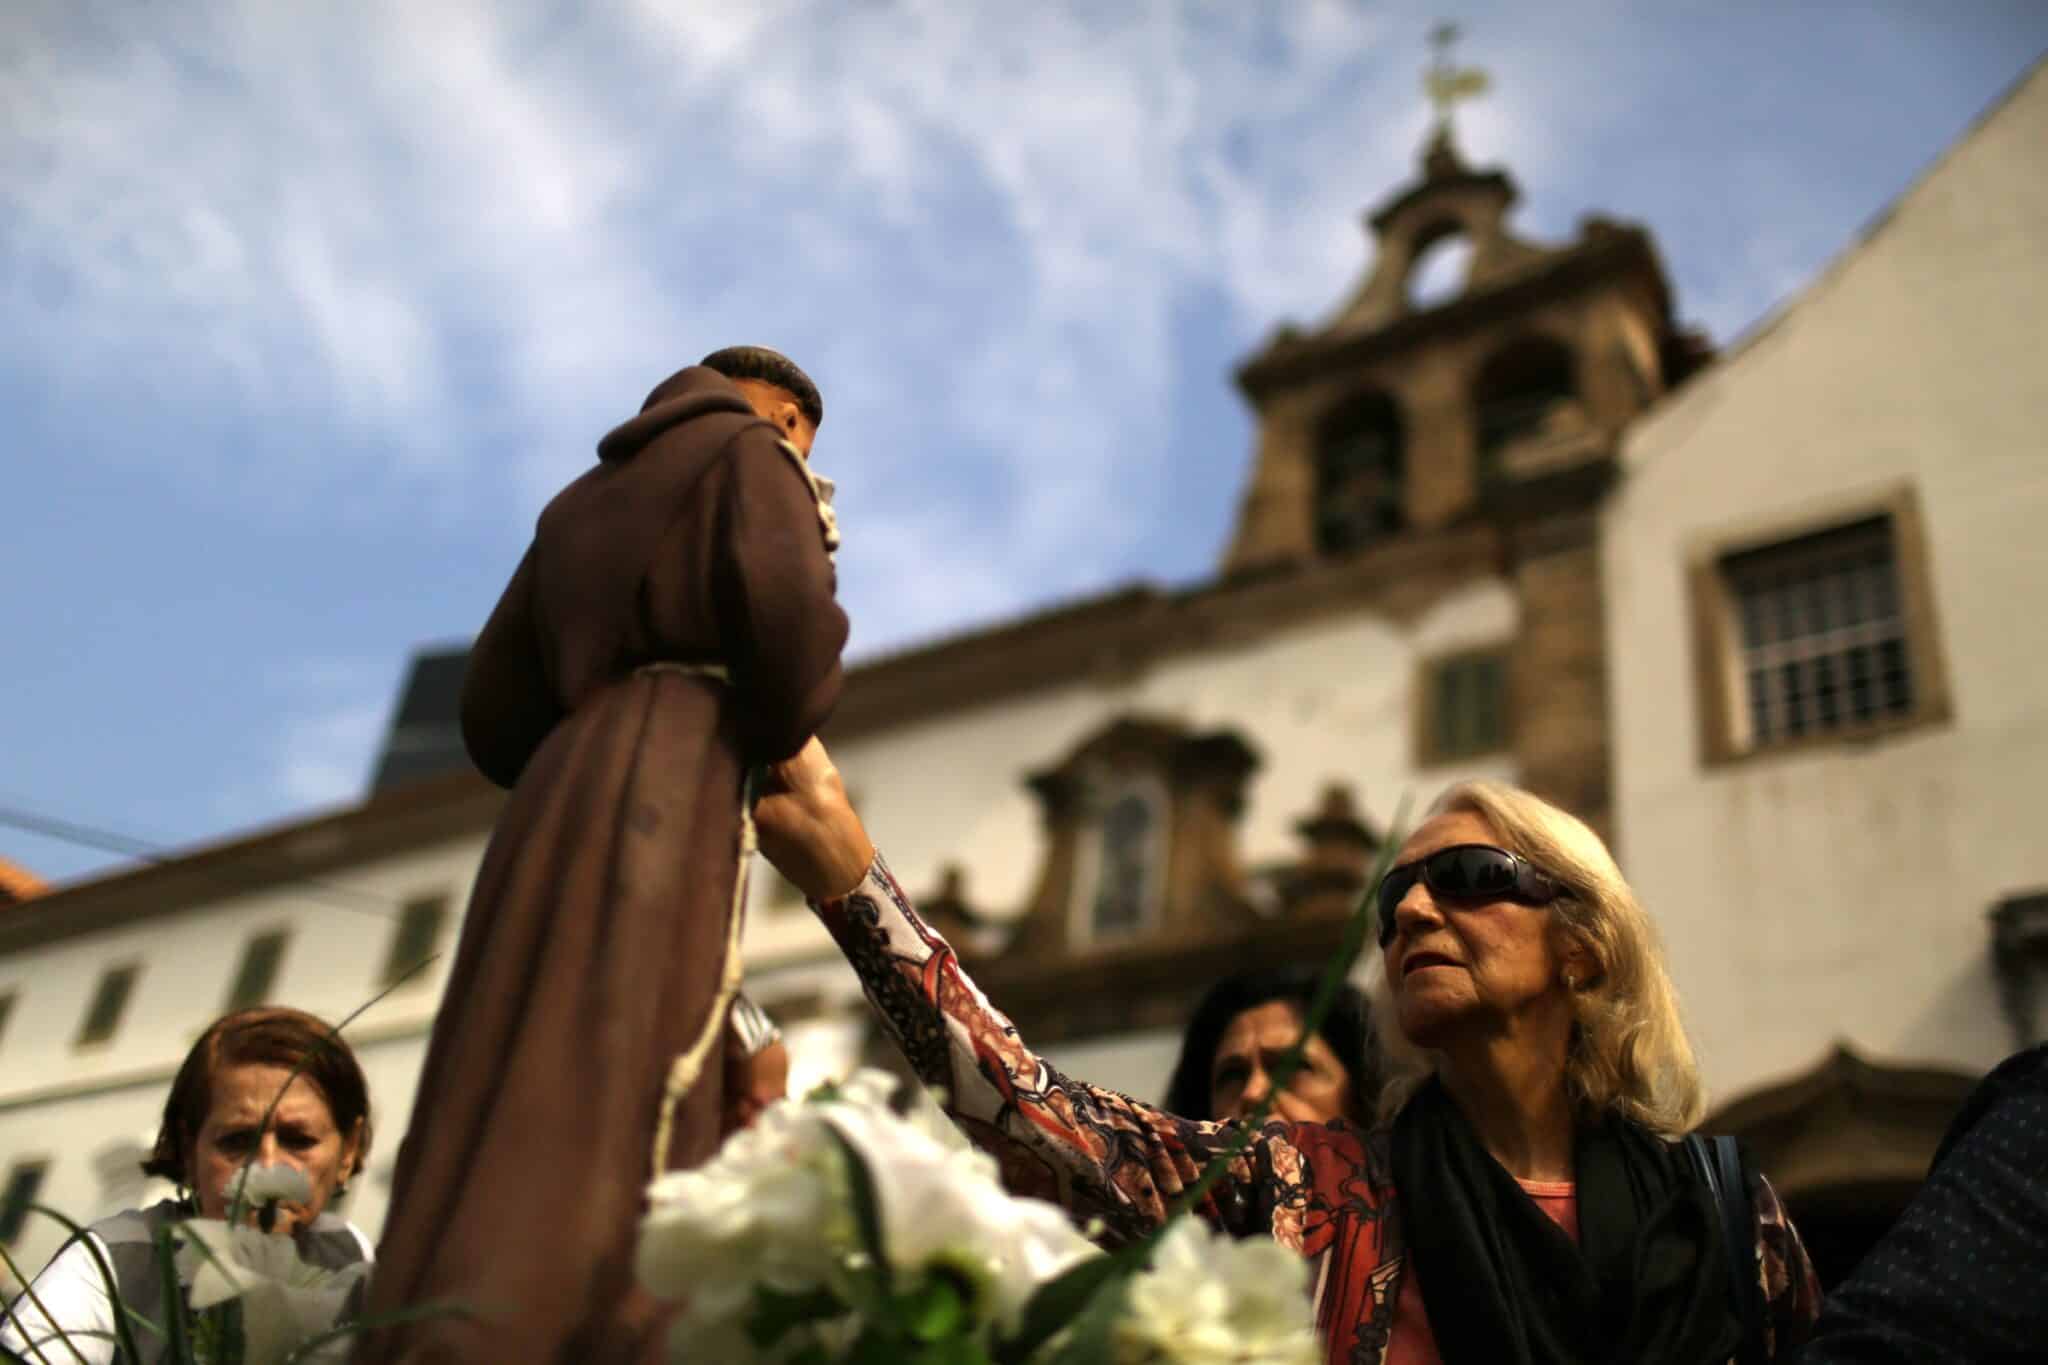 People pray in front of a statue of St. Anthony at a convent in Rio de Janeiro on the feast of St. Anthony of Padua June 13. (CNS photo/Pilar Olivares, Reuters)